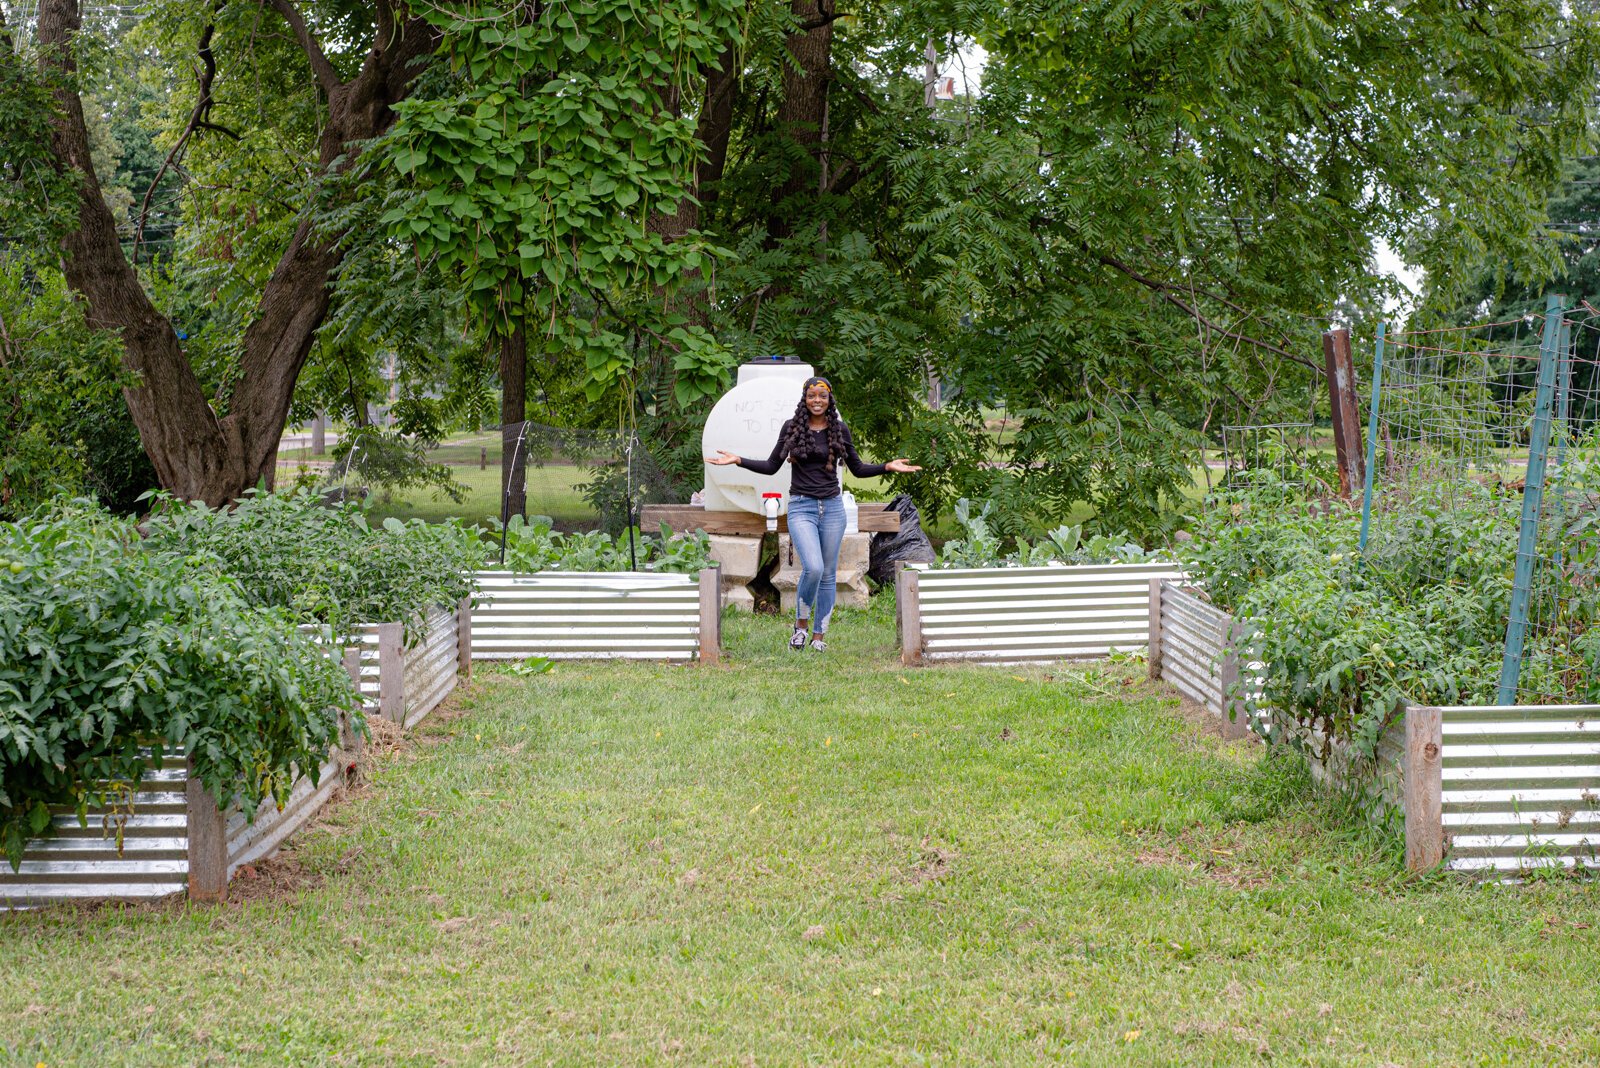 Mary Crosby, lead gardener, at the community garden shown here with the garden beds.